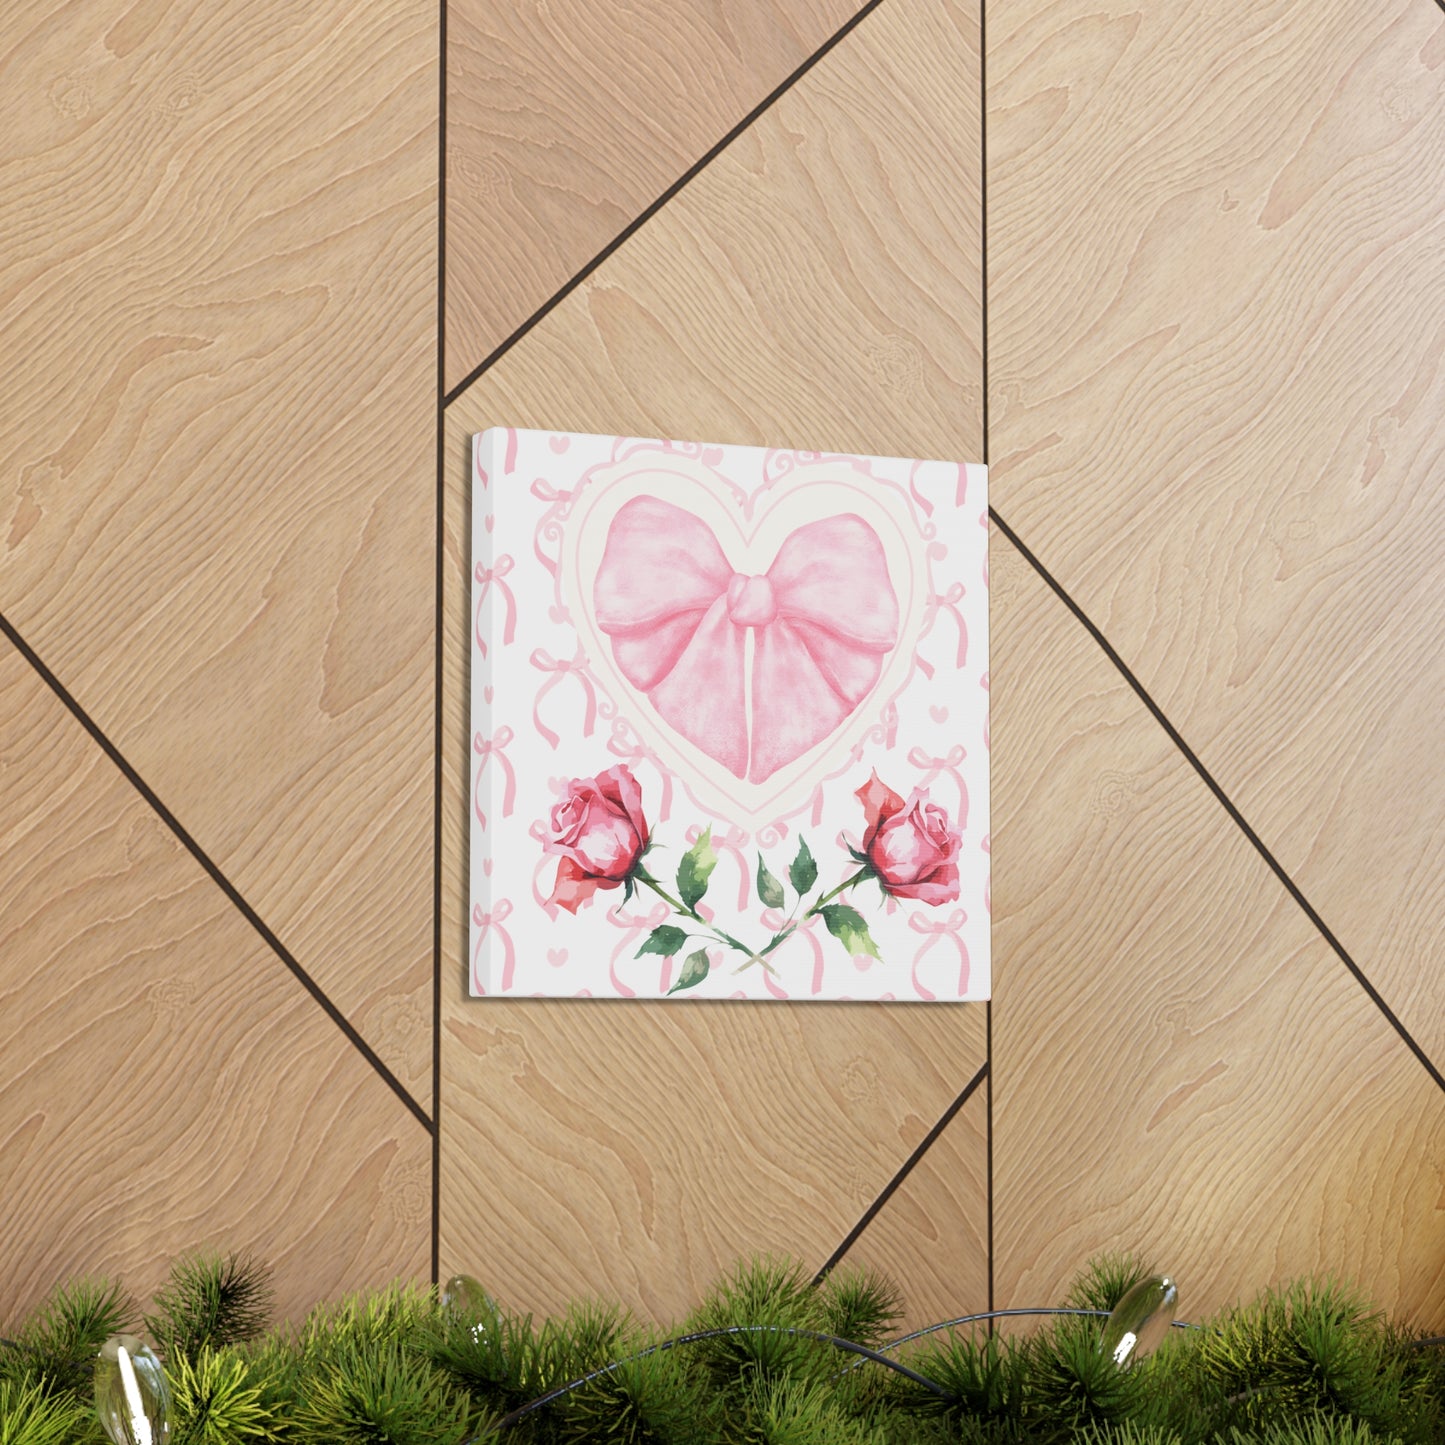 Pink & White Coquette Heart Bow with Rose Wrapped Gallery Canvas Art - Multiple Sizes